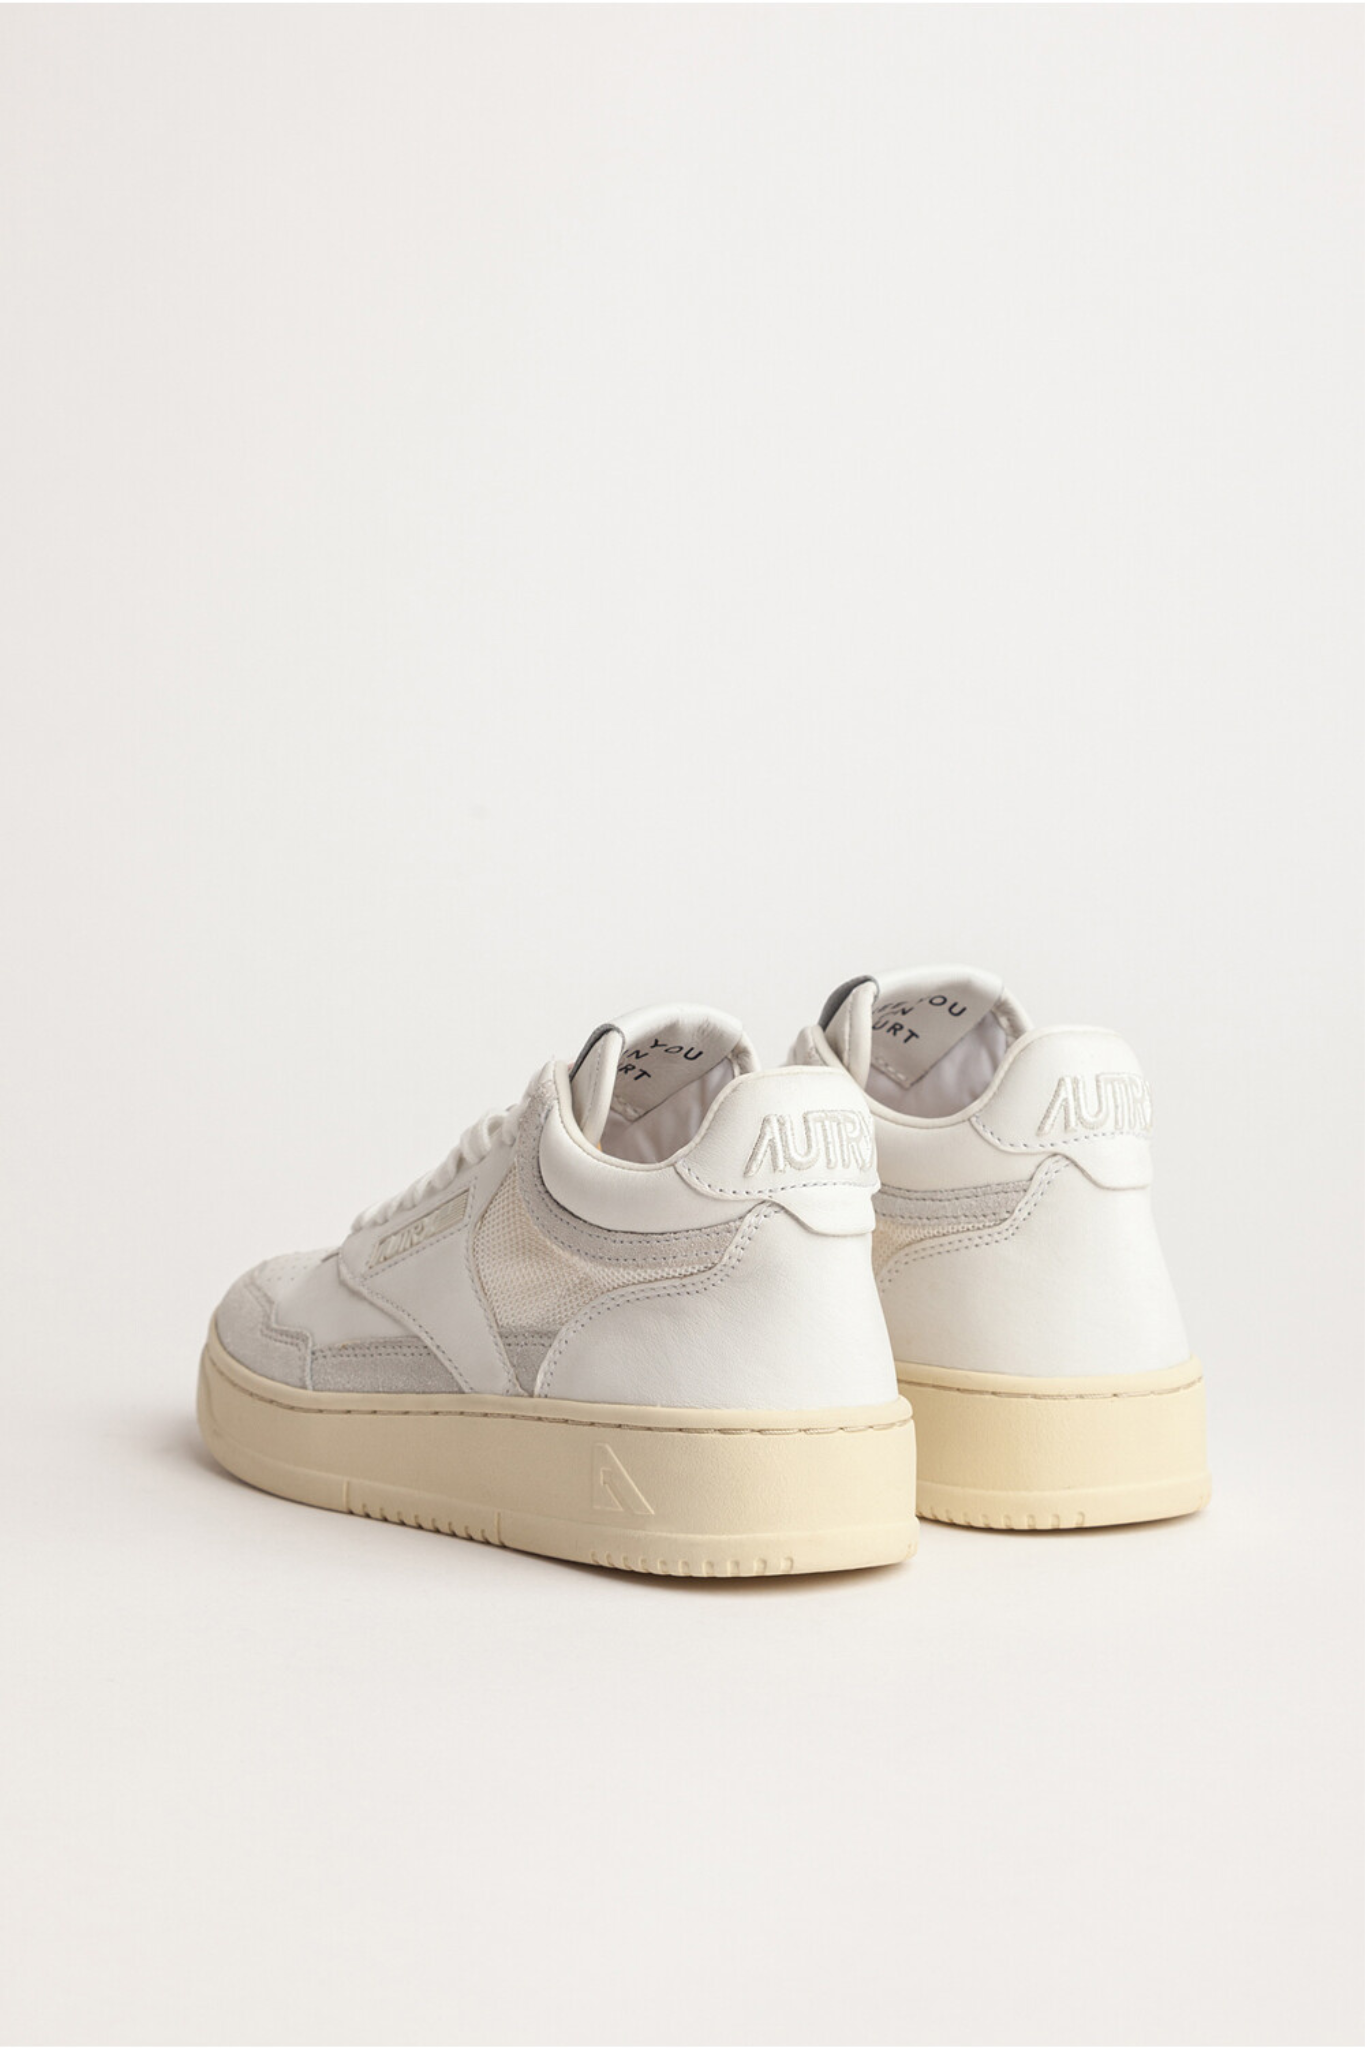 AOMW-CE11 - OPEN MID-TOP SNEAKERS IN LEATHER, MESH AND SUEDE COLOR WHITE